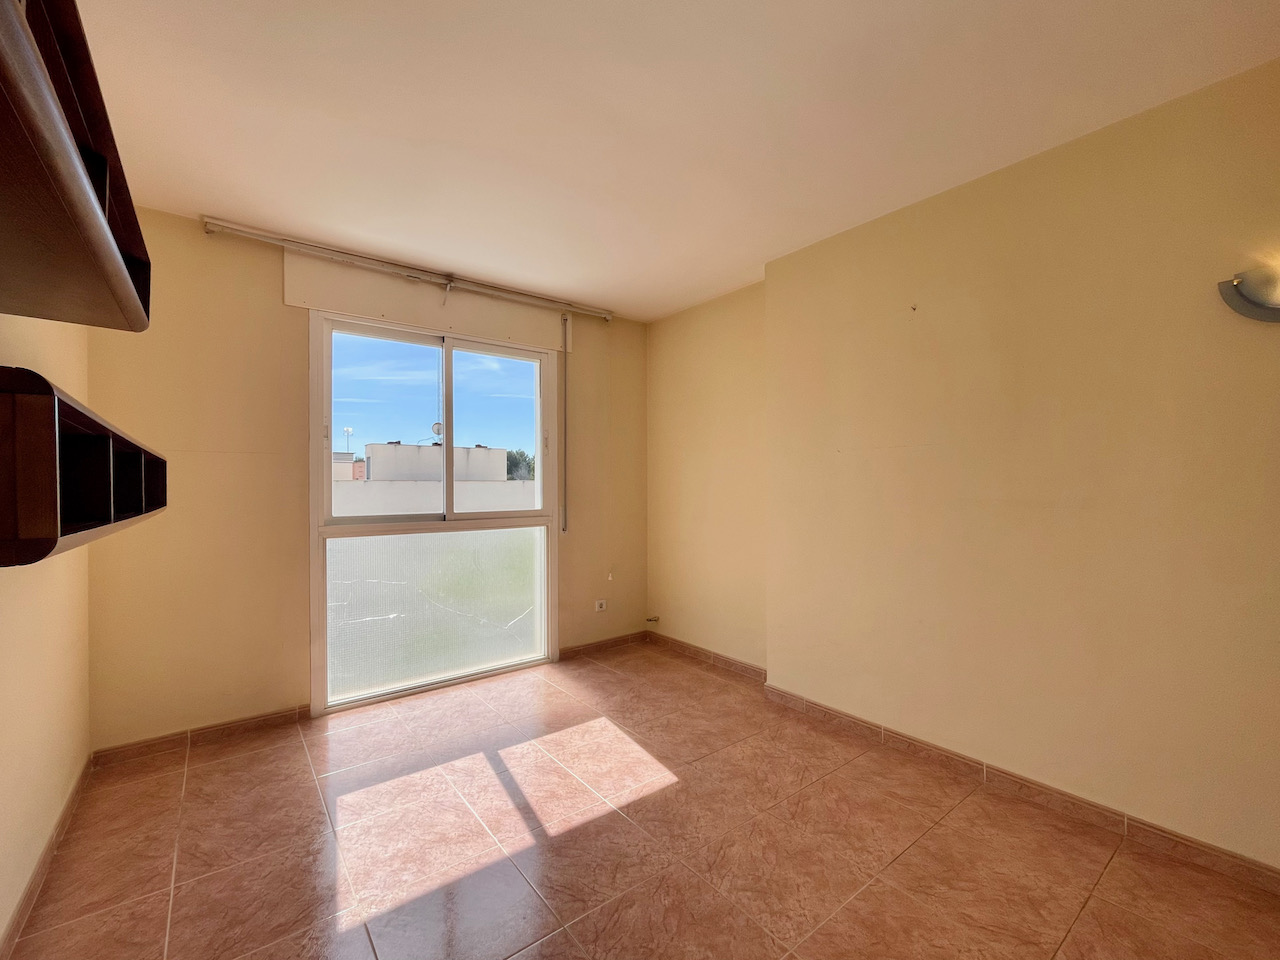 Flat with a lot of potential in Marivent, with terrace and parking, Palma.